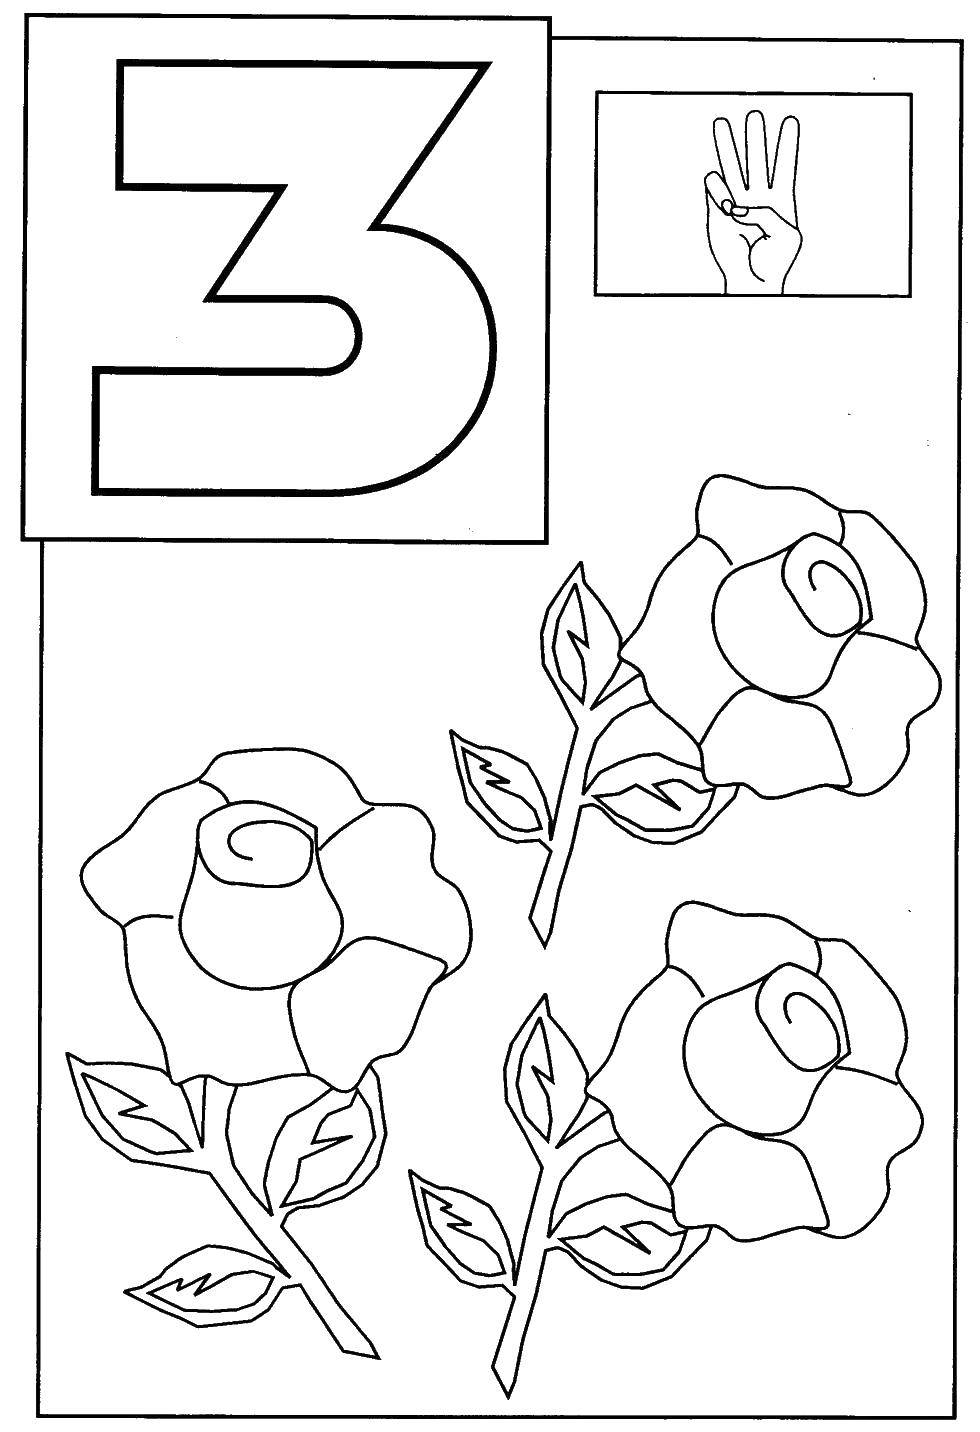 Coloring Three roses. Category flowers. Tags:  flowers, roses.